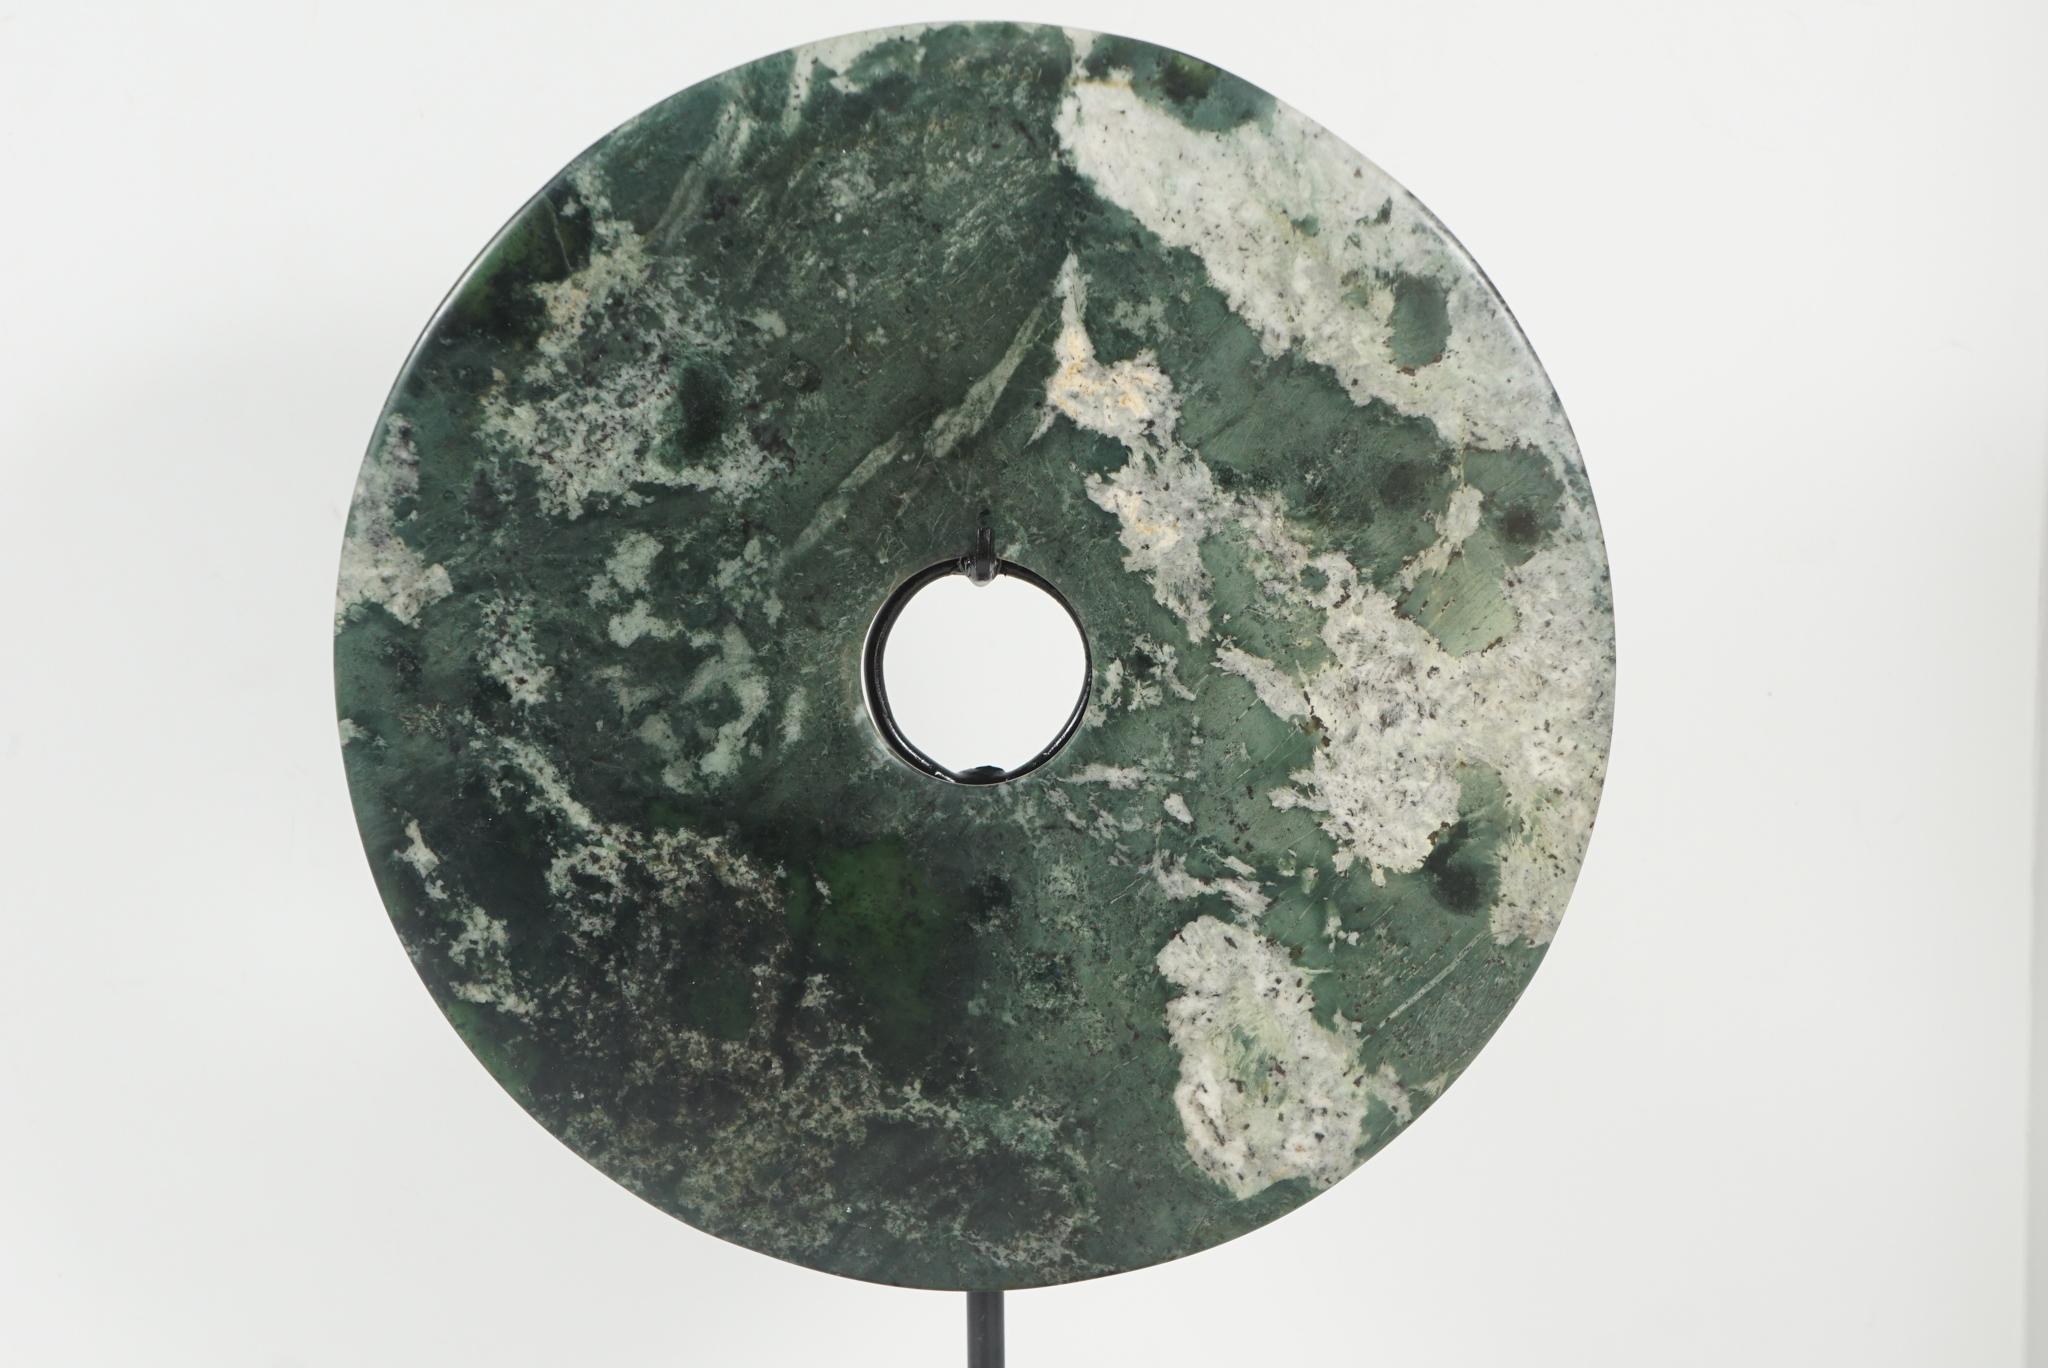 This large finely veined jade bi disc is of a dream stone quality. Of contemporary creation, the bi disc is mounted on a stand but is removable for inspection. The Bi Disc is an ancient symbol of ritual origin in China. Circular in form these